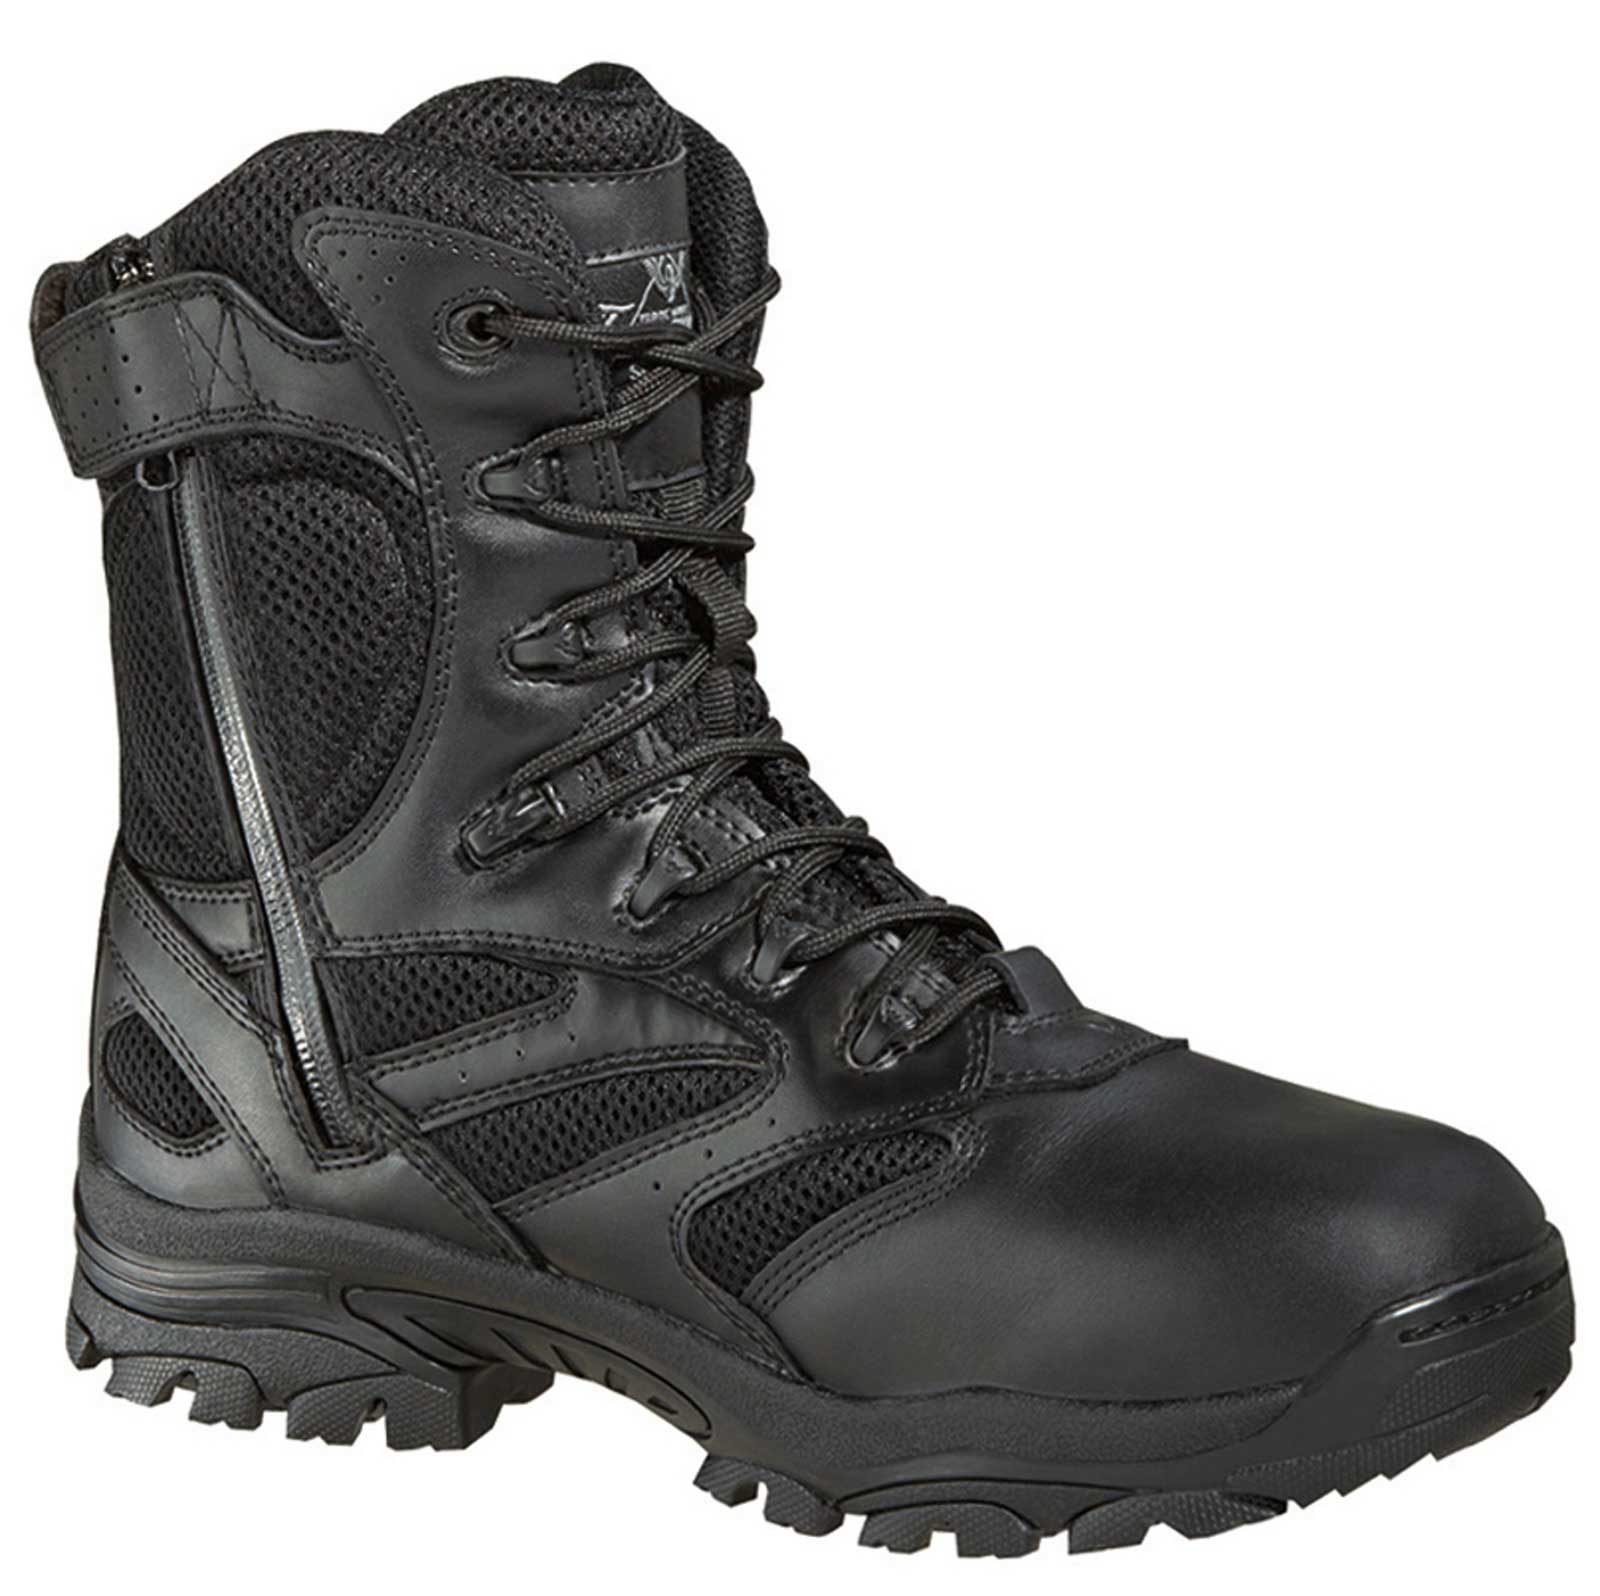 ALL SIZES THOROGOOD UNIFORM QUICK RELEASE NON METALLIC STATION BOOTS 834-6034 